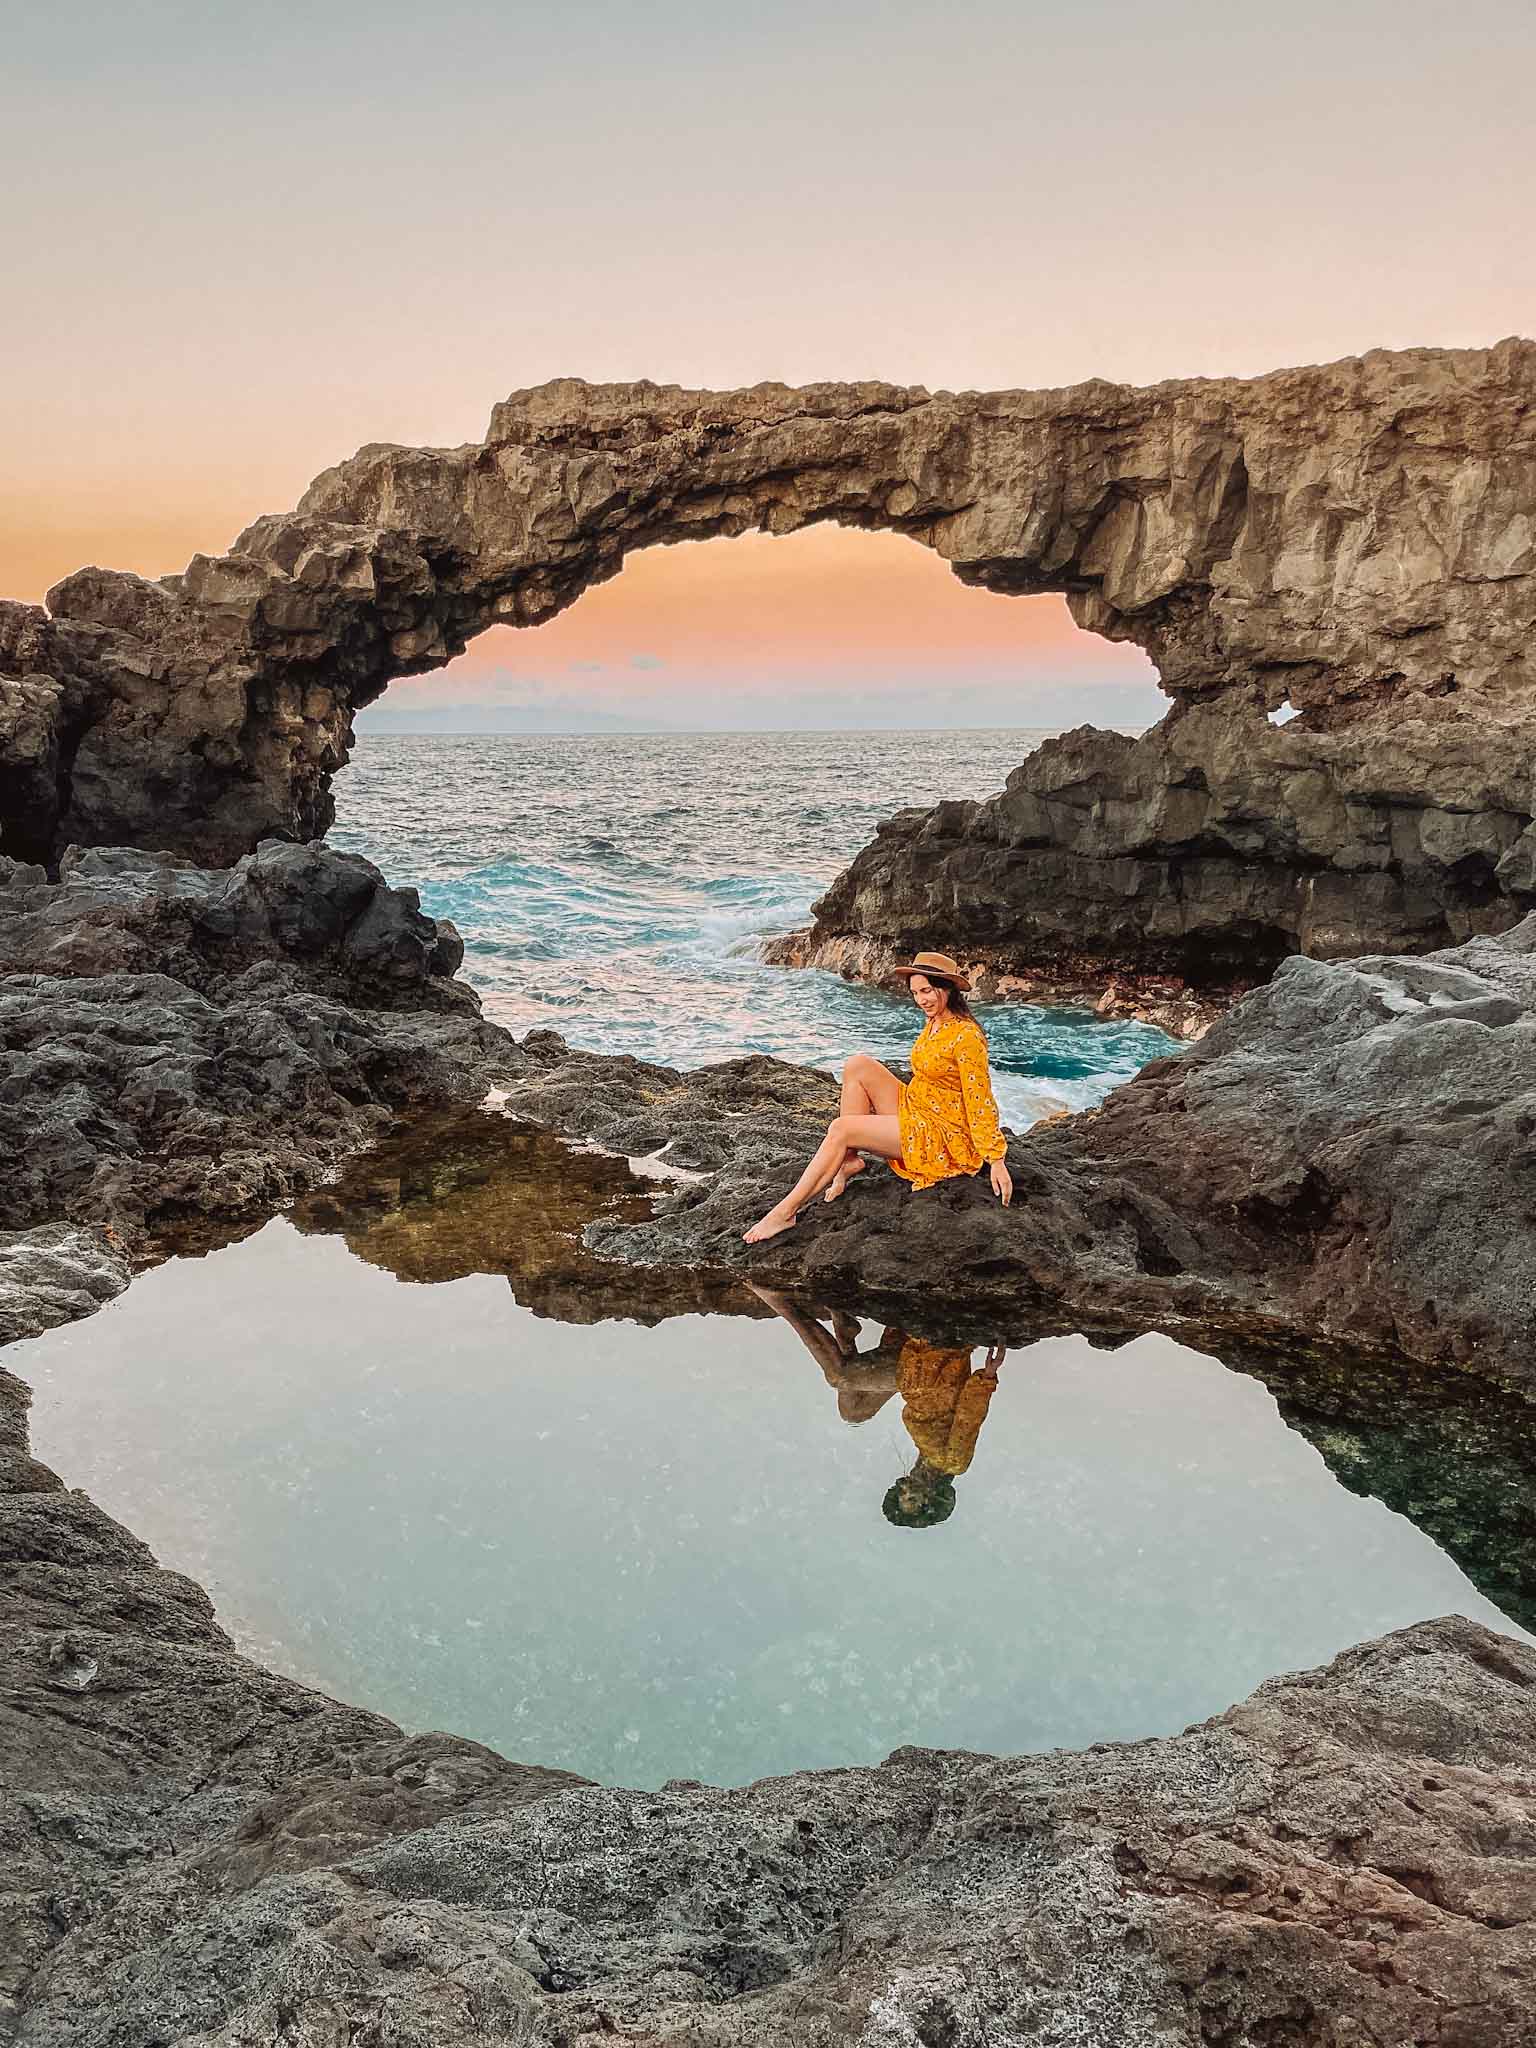 Natural pools in El Hierro - Stone arch of Charco Manso